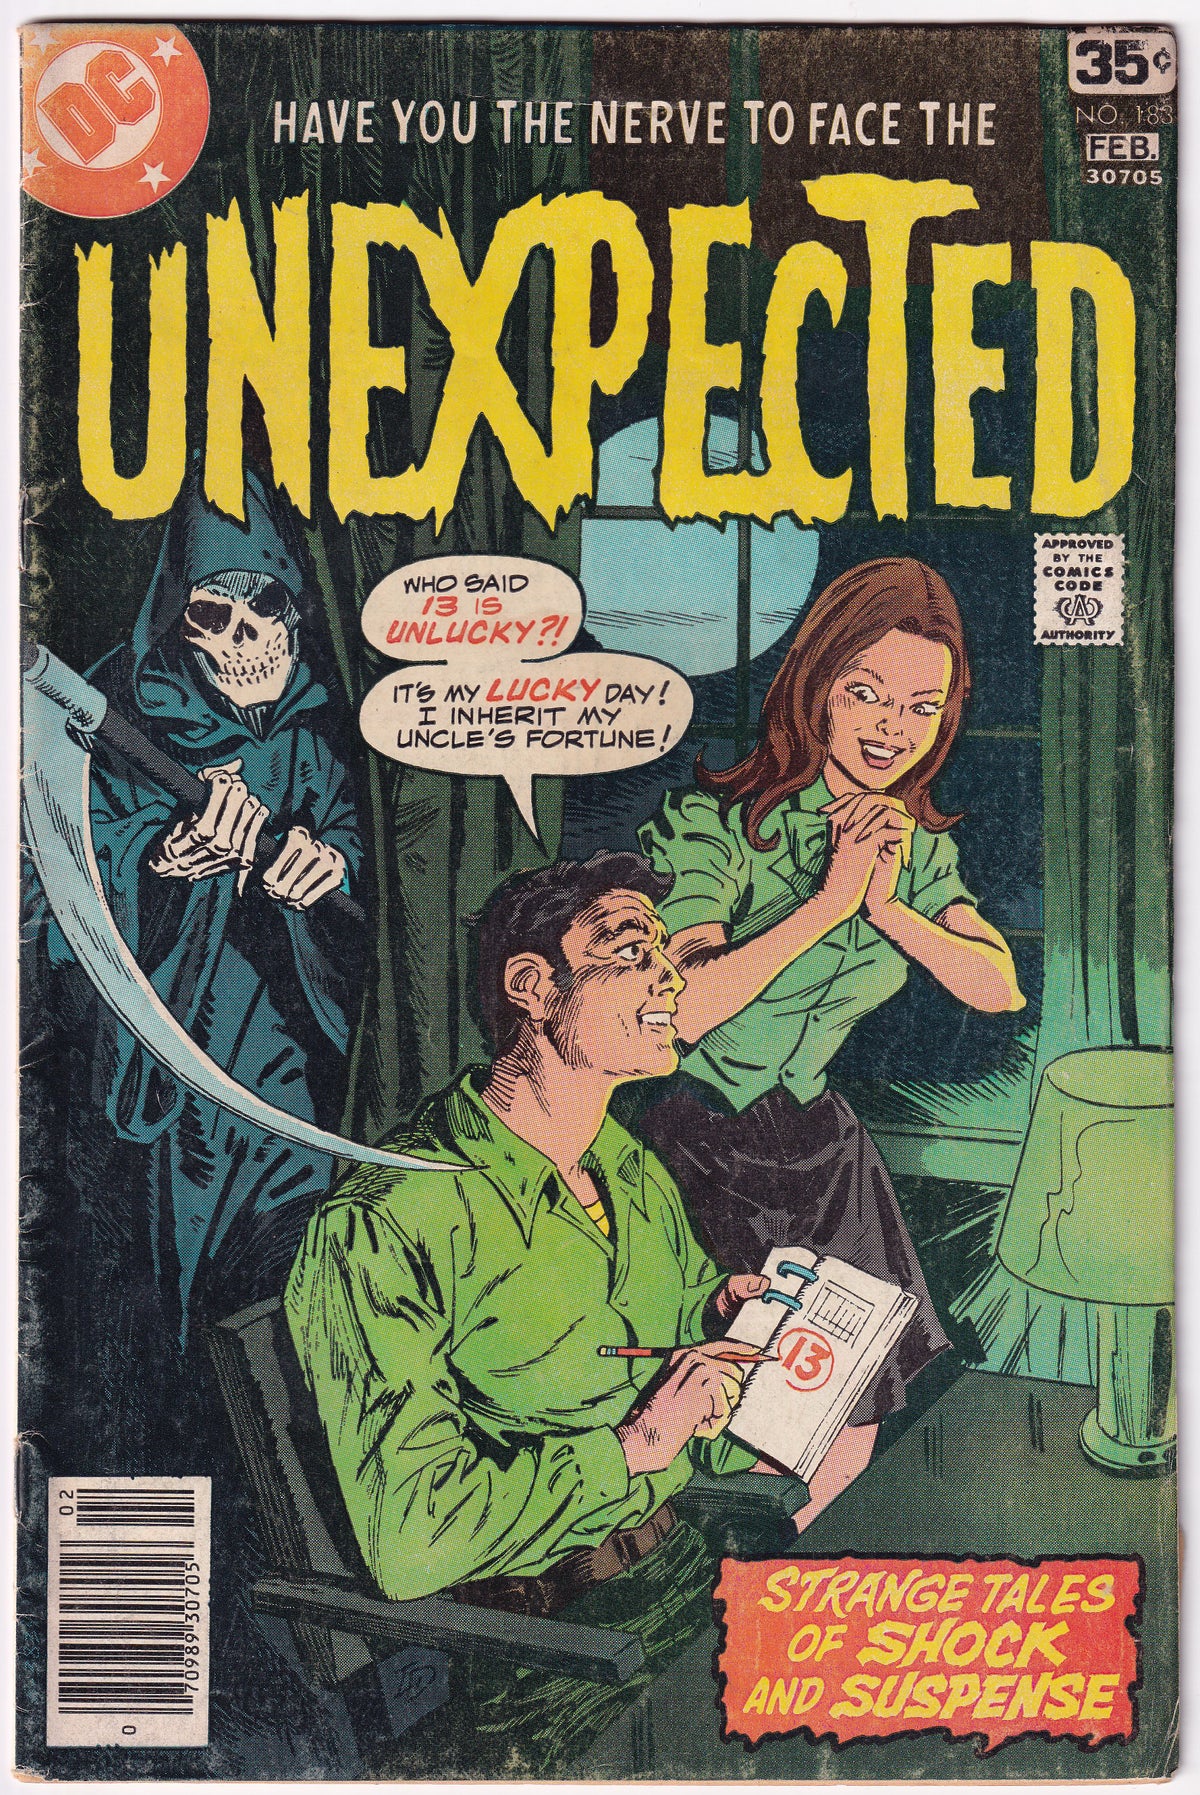 Photo of Unexpected, Vol. 1 (1978)  Iss 183 Very Good  Comic sold by Stronghold Collectibles